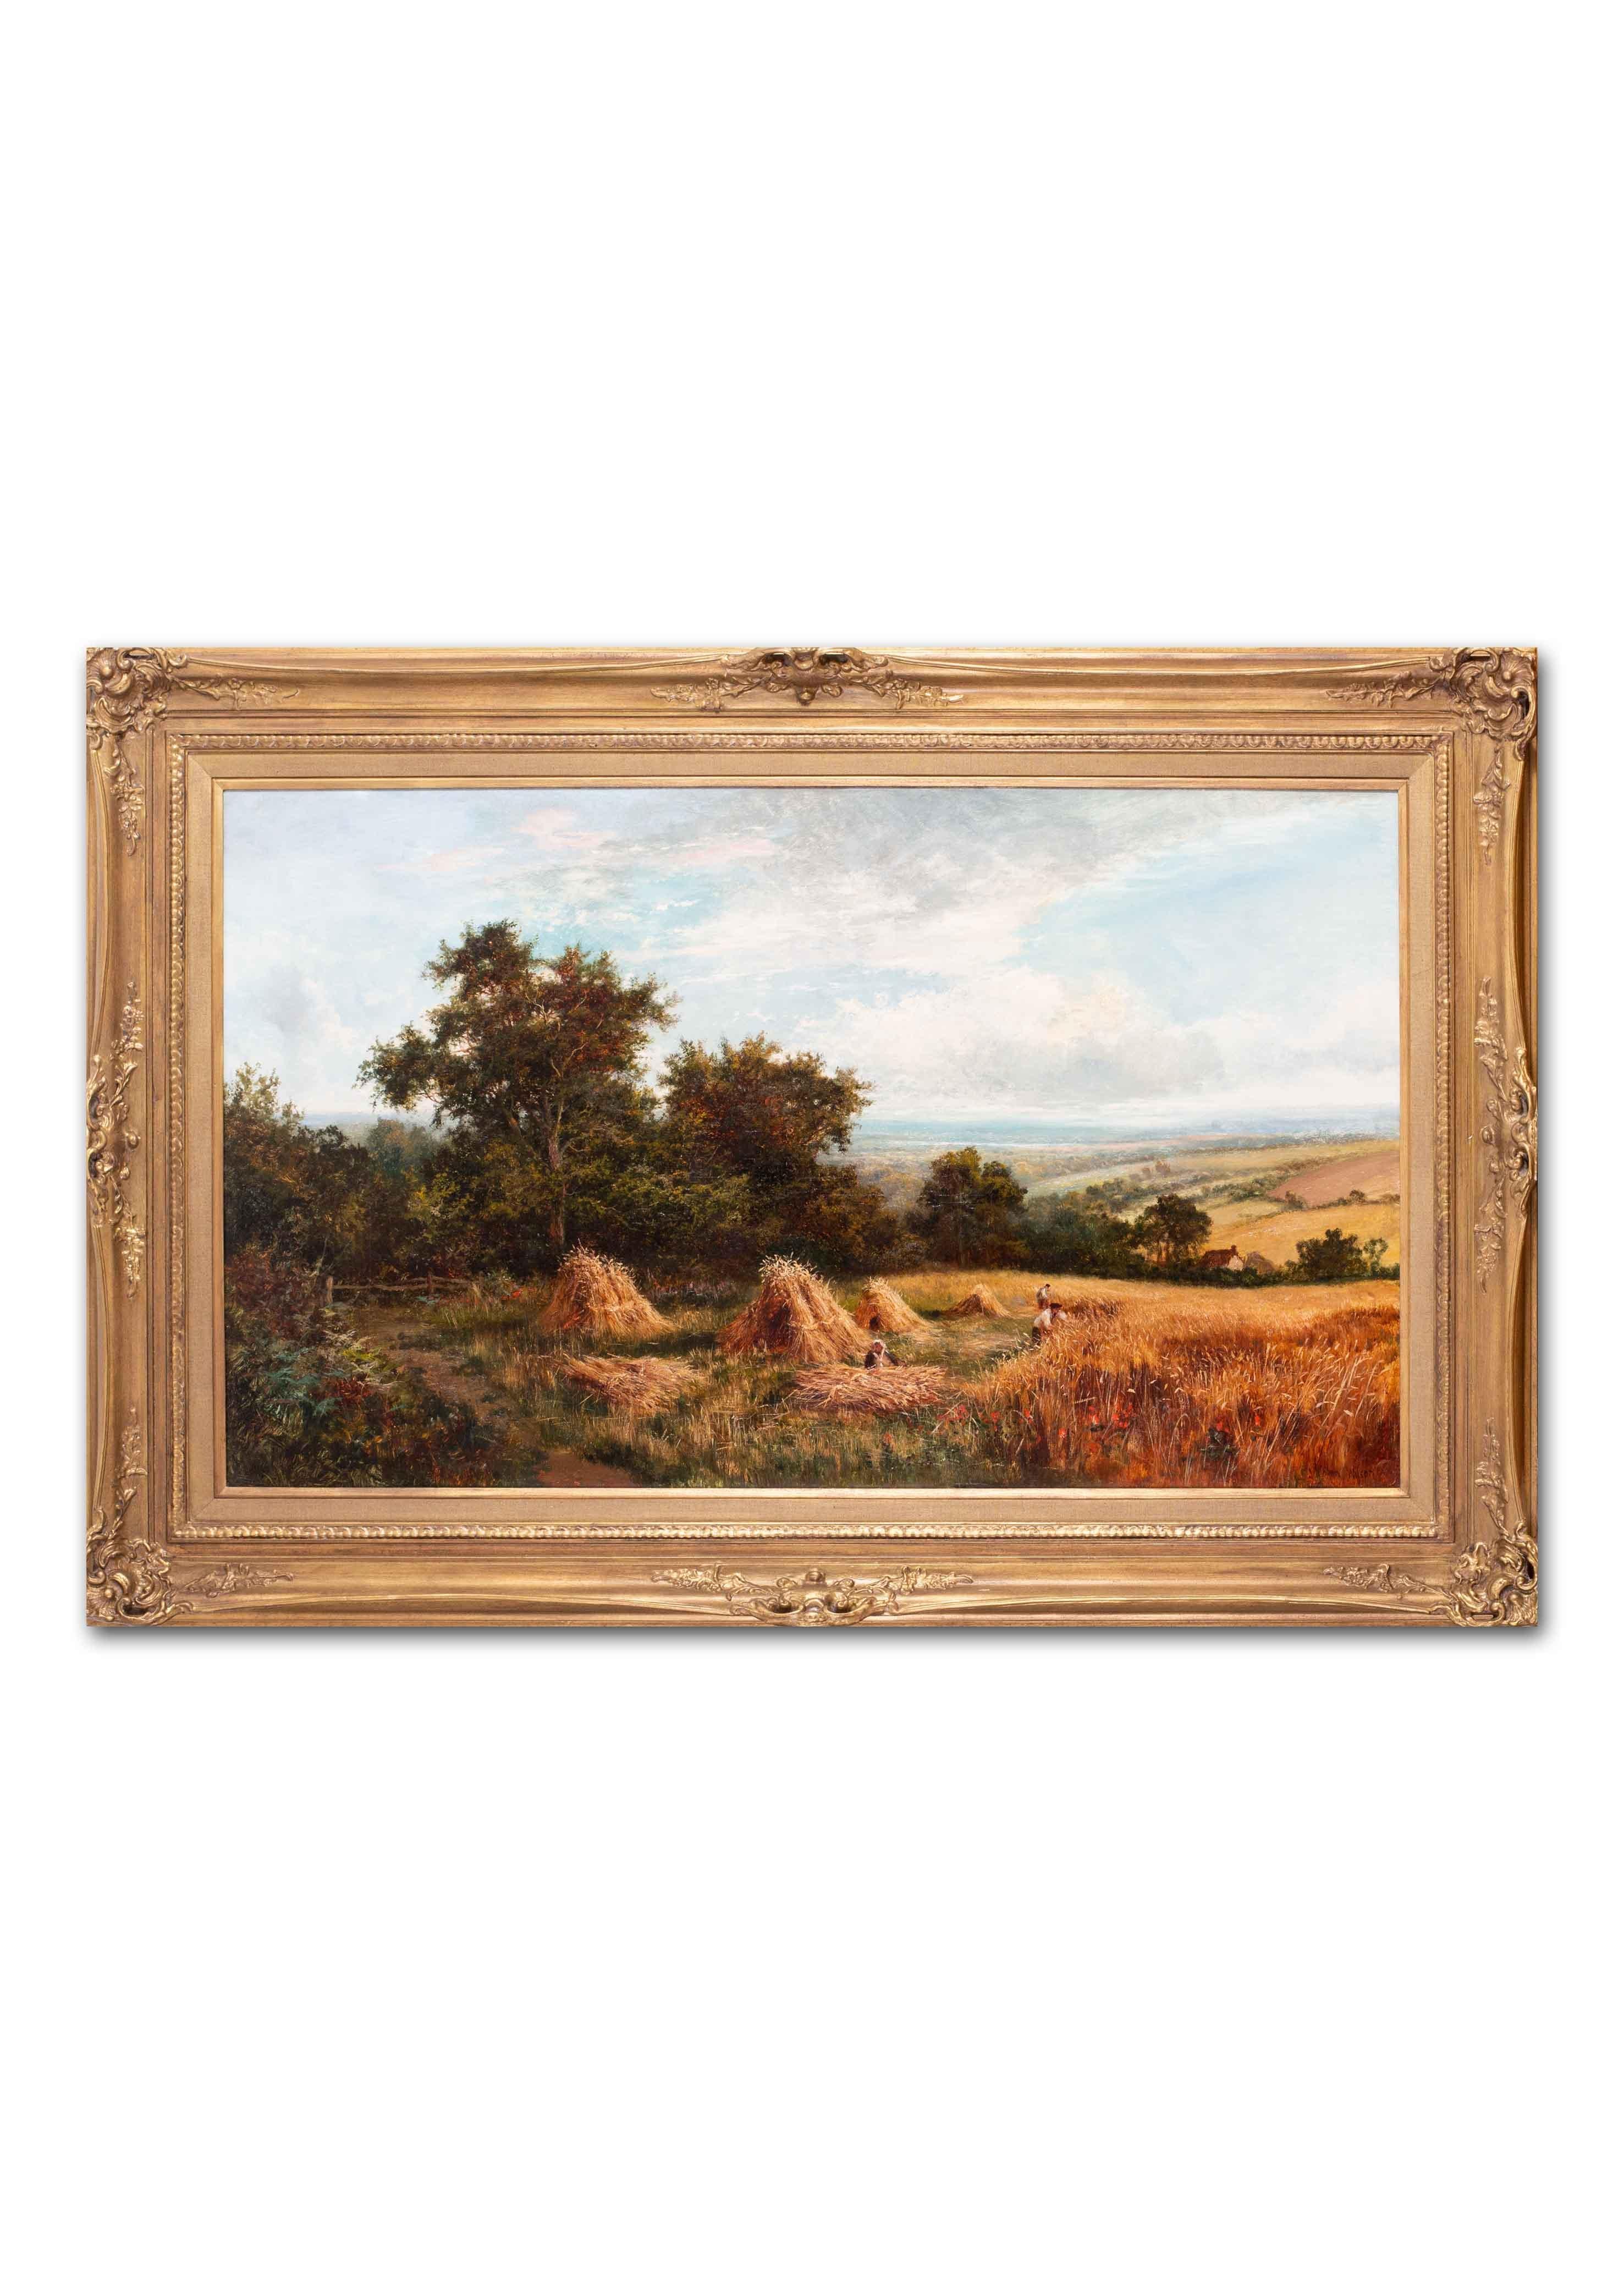 Large, British 19th Century oil painting of Harvest time - Brown Landscape Painting by John James Wilson